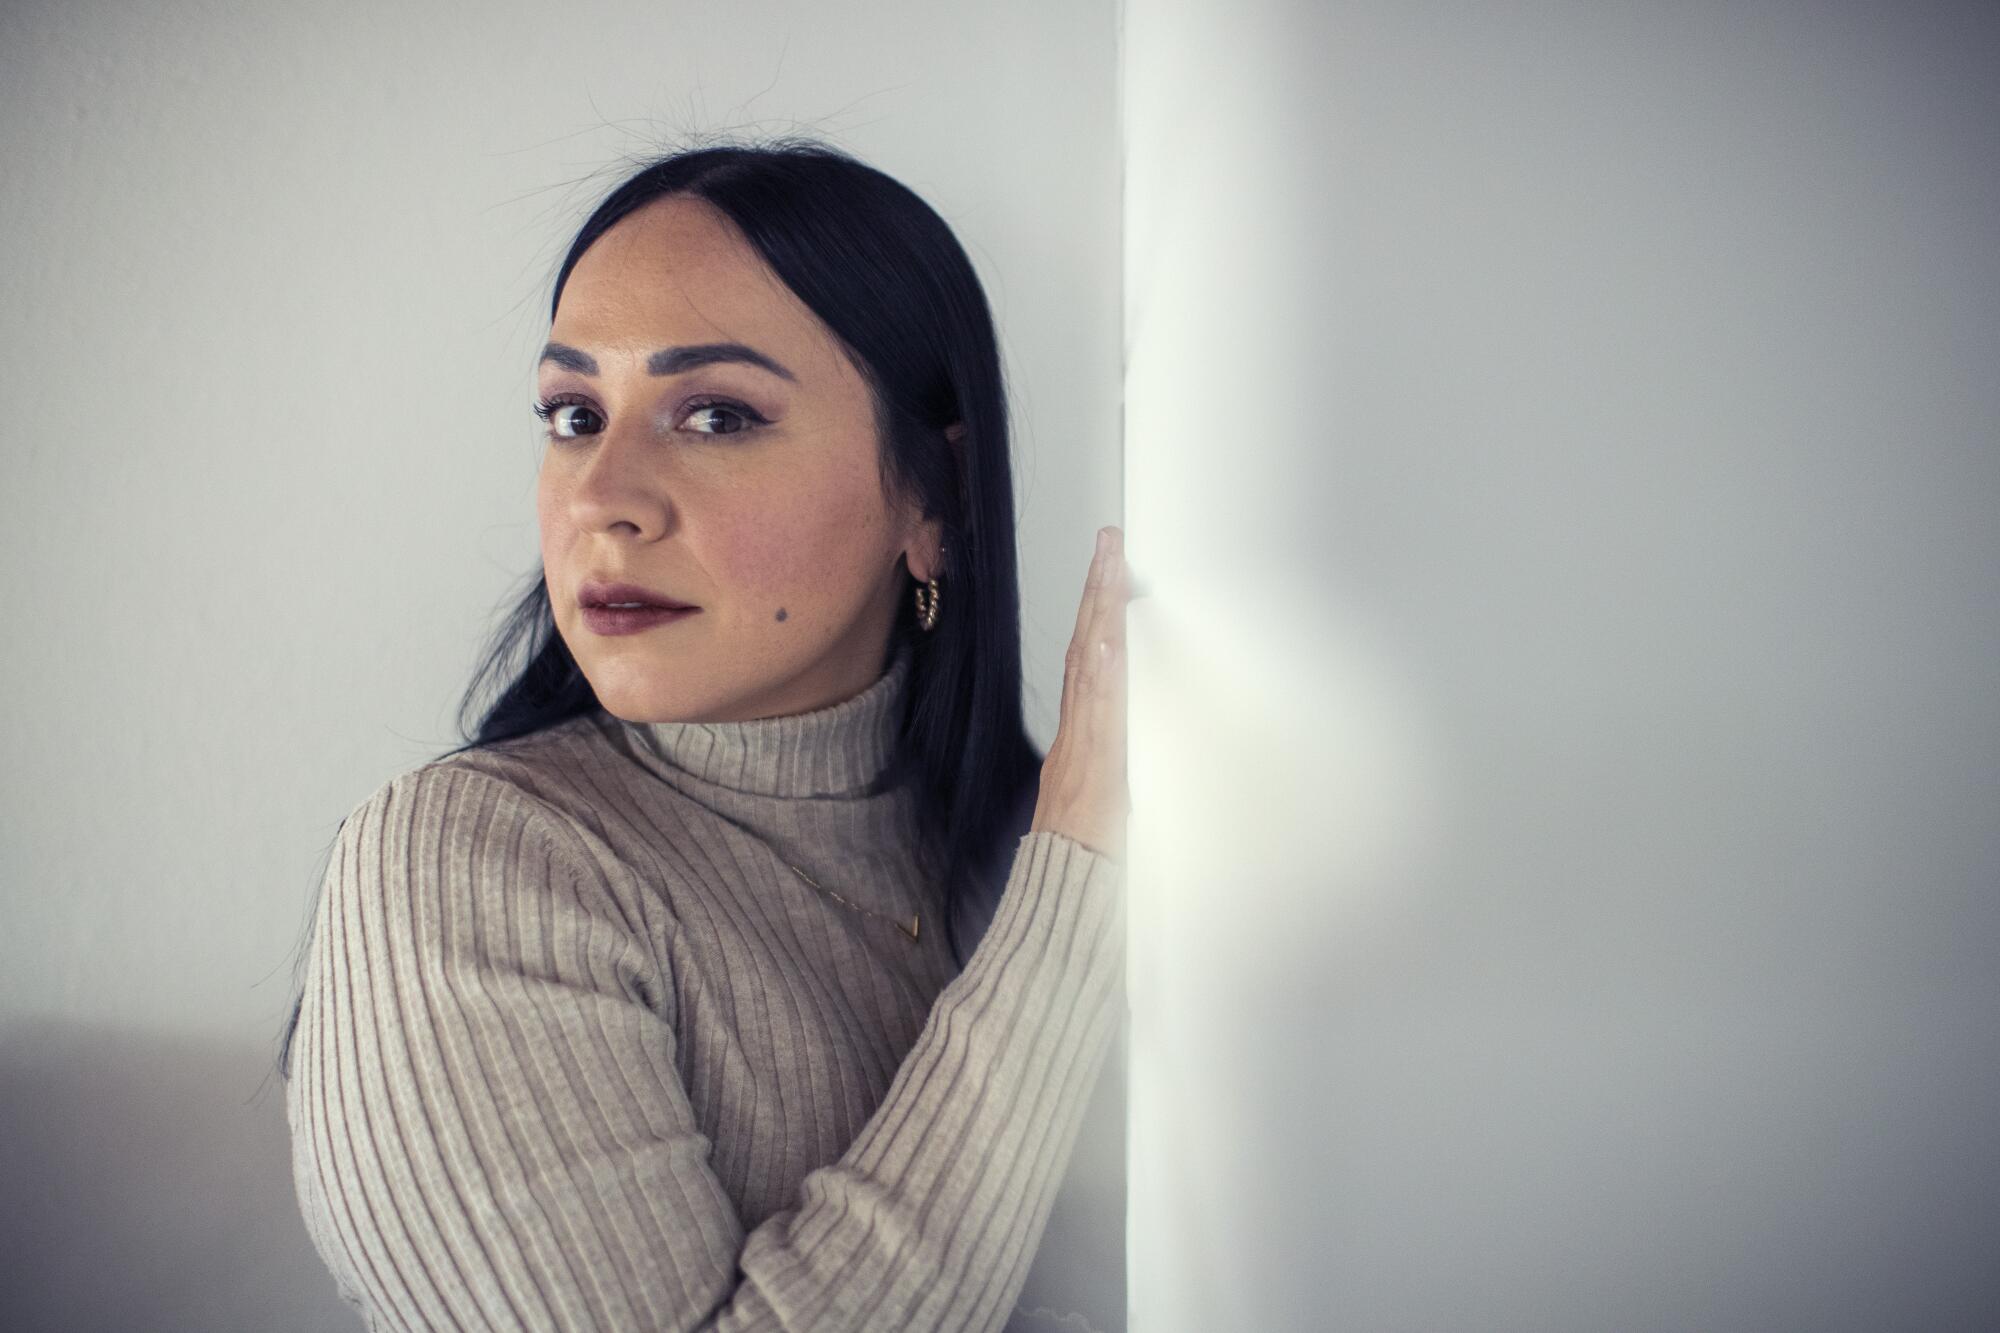 Carla Morrison reclaims her mental health in song and on social